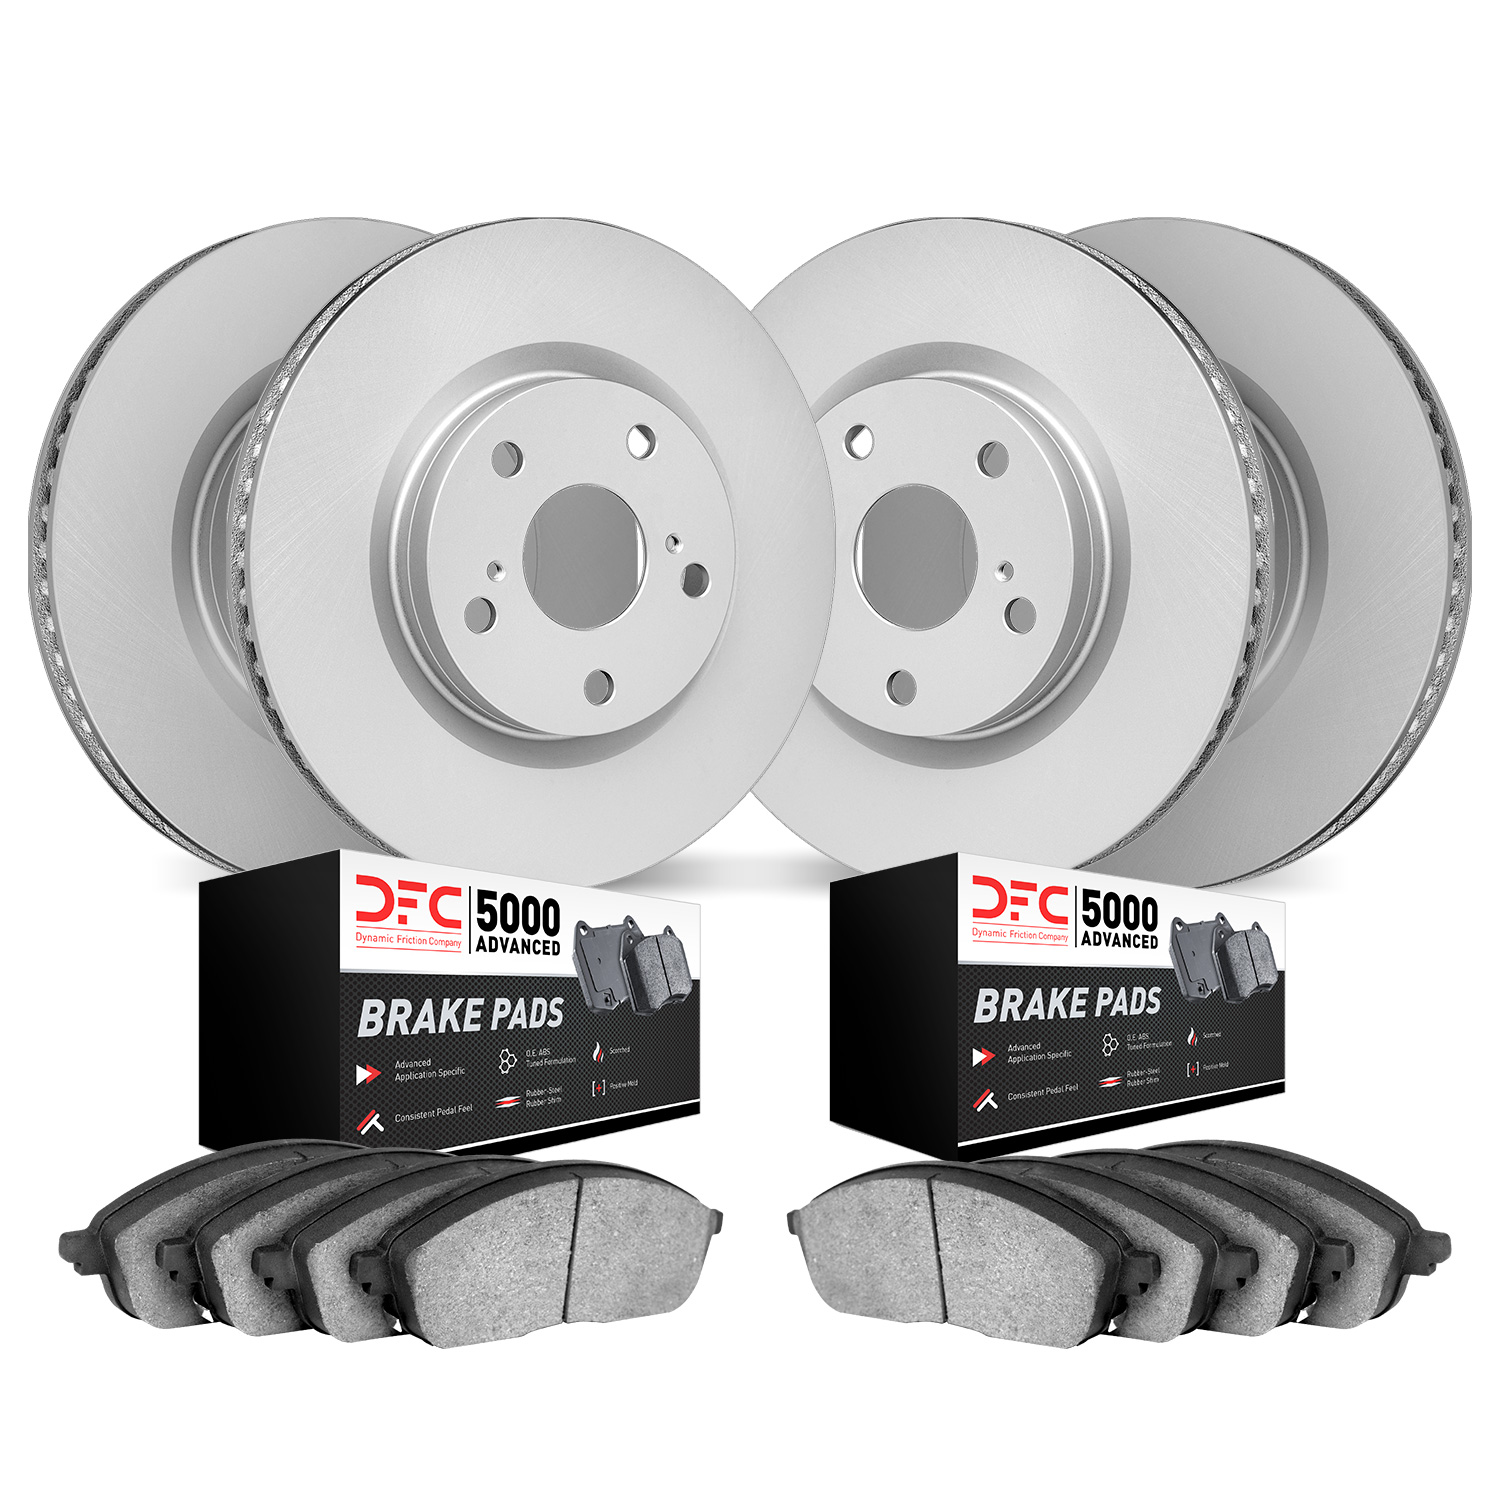 4504-31165 Geospec Brake Rotors w/5000 Advanced Brake Pads Kit, Fits Select BMW, Position: Front and Rear